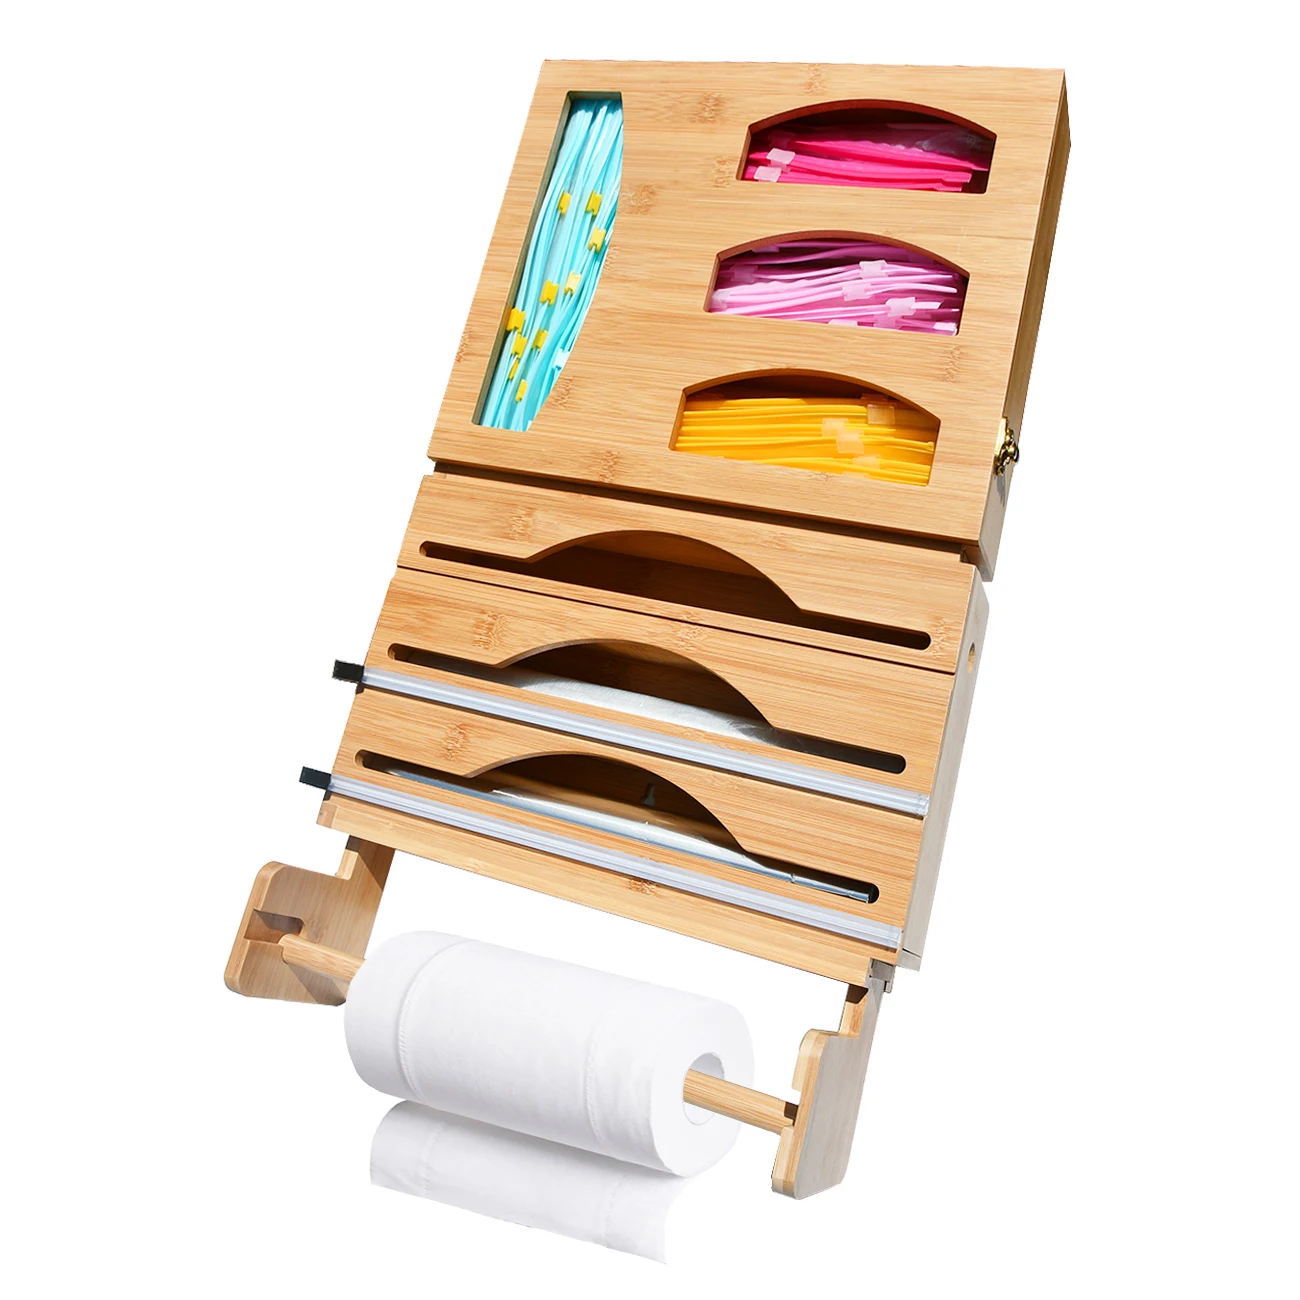 8 in 1 Bamboo Ziplock Bag Storage Organizer and Cling Film Wrap Dispenser with Paper Holder for Home & Kitchen